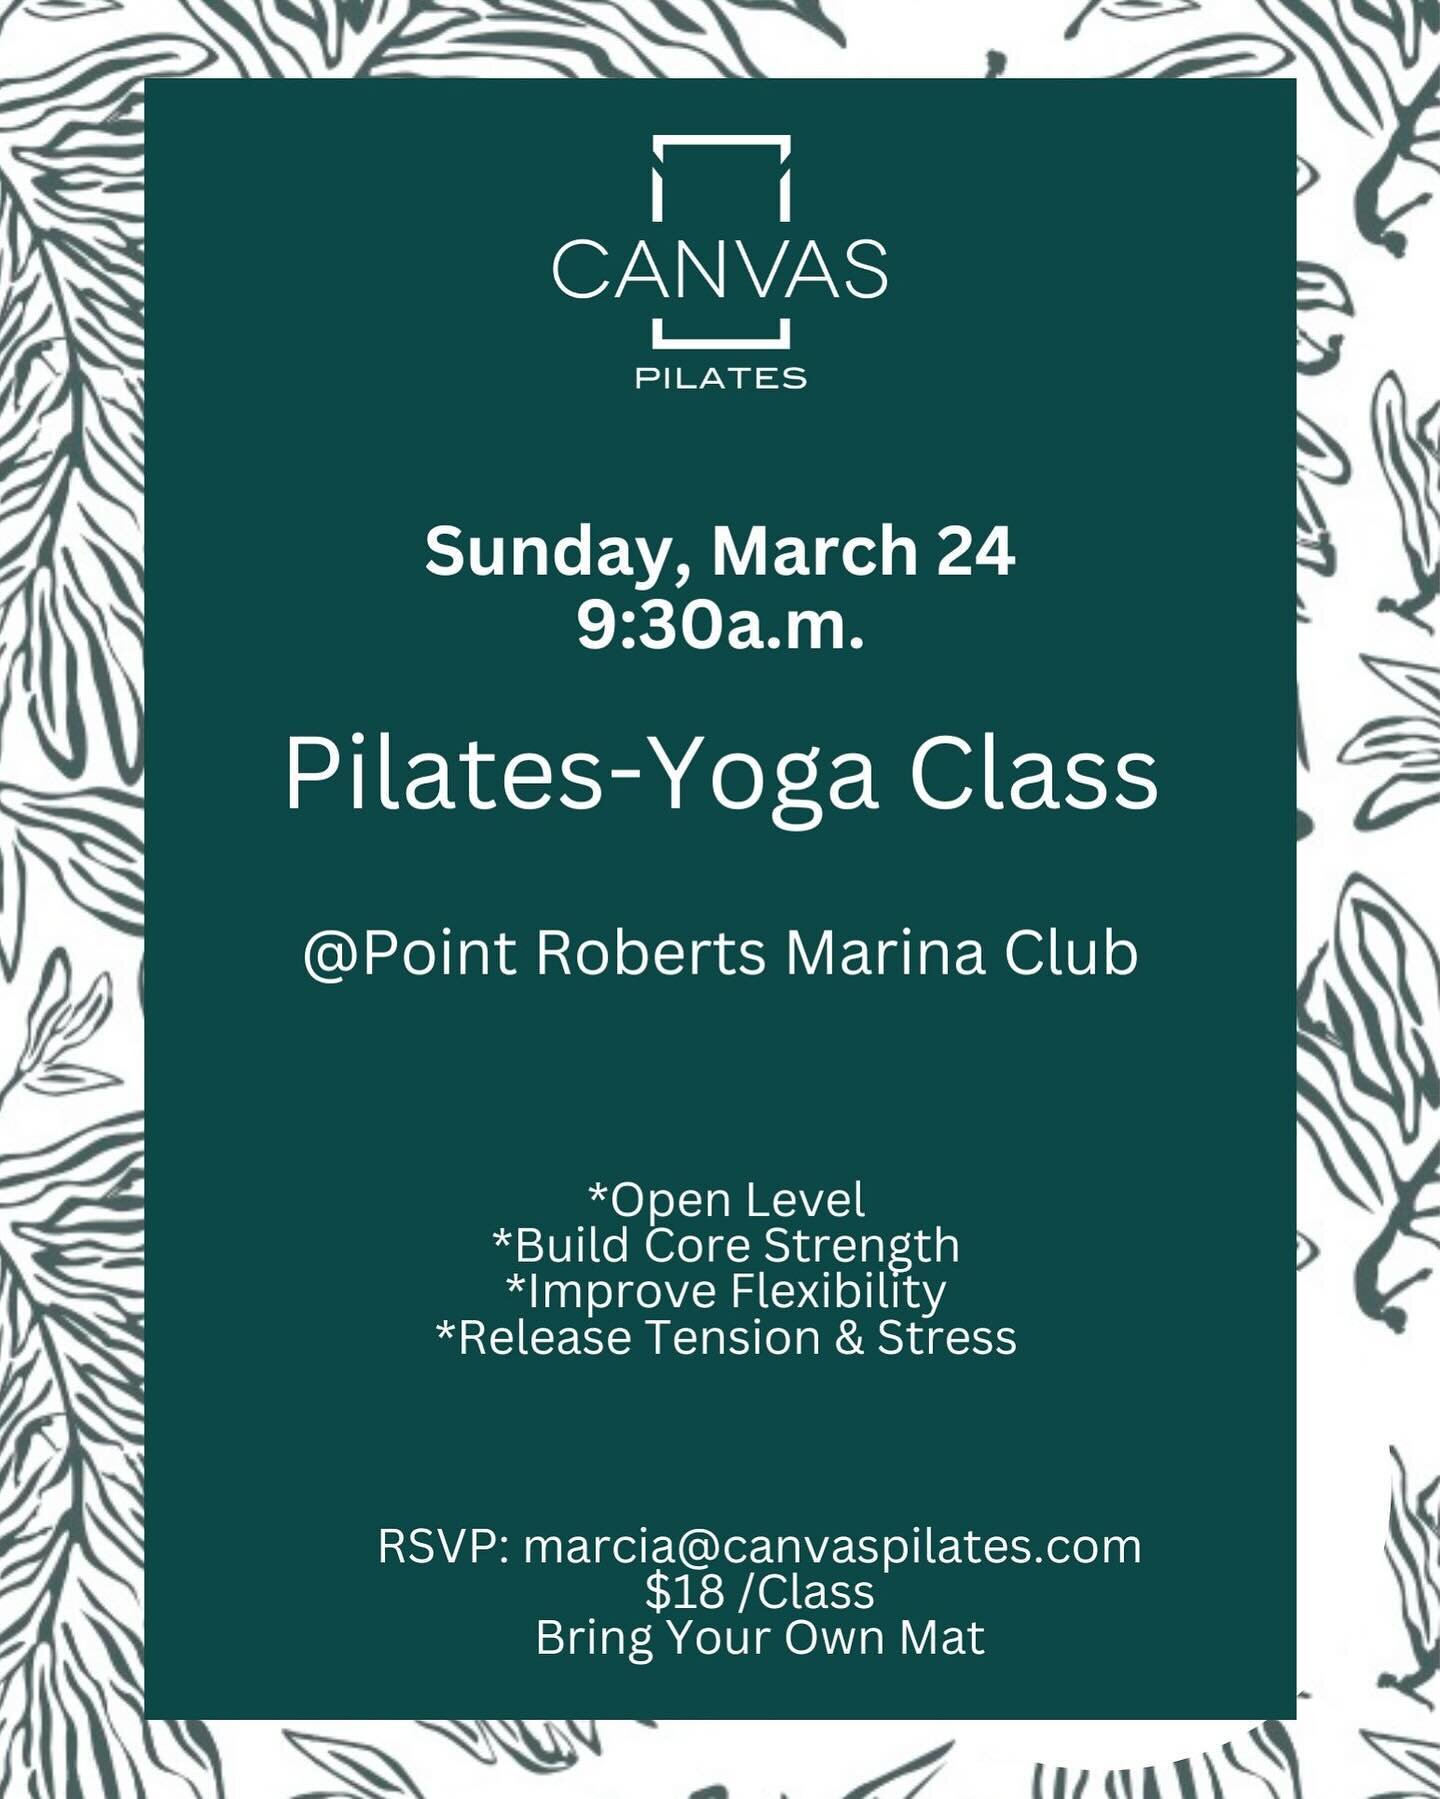 Rejuvenate with me this Sunday with a full hour of Pilates &amp; Yoga class. 
Experience a class with ocean views at the Marina Club in Point Roberts ,WA.

#pilatesmat #pilates #pointroberts #yoga #yogaclass #pilatesforlife❤️